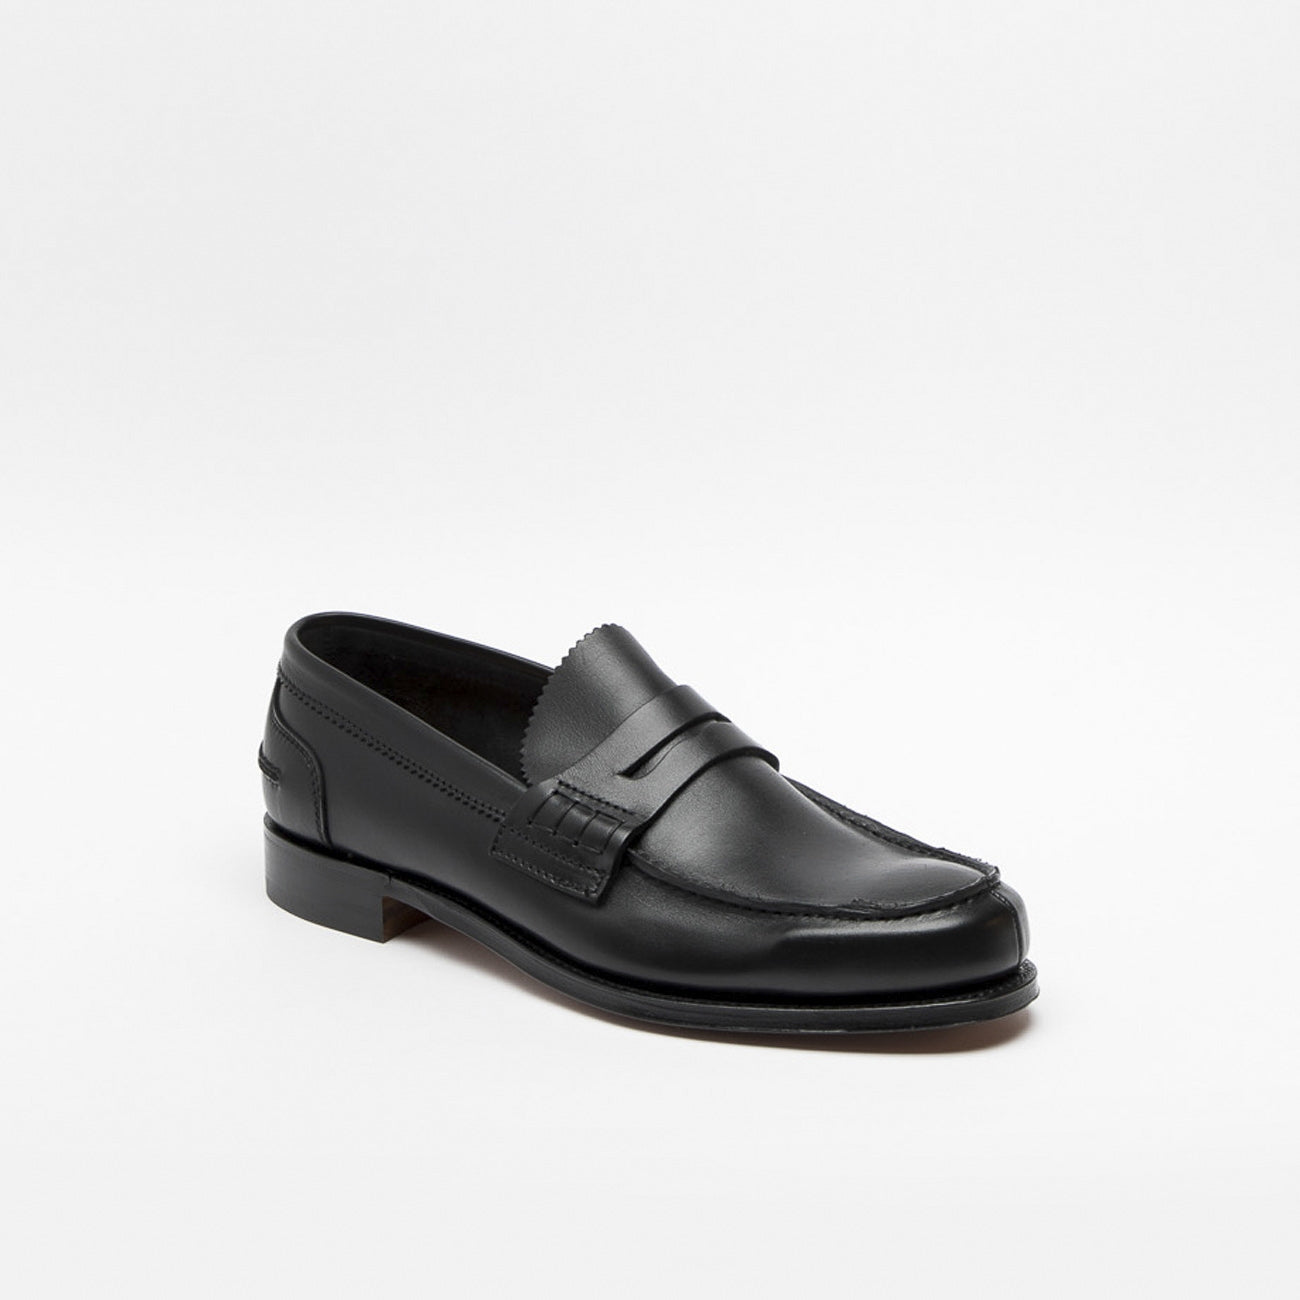 Cheaney Joseph & Sons Dover EF black softee calf penny loafer